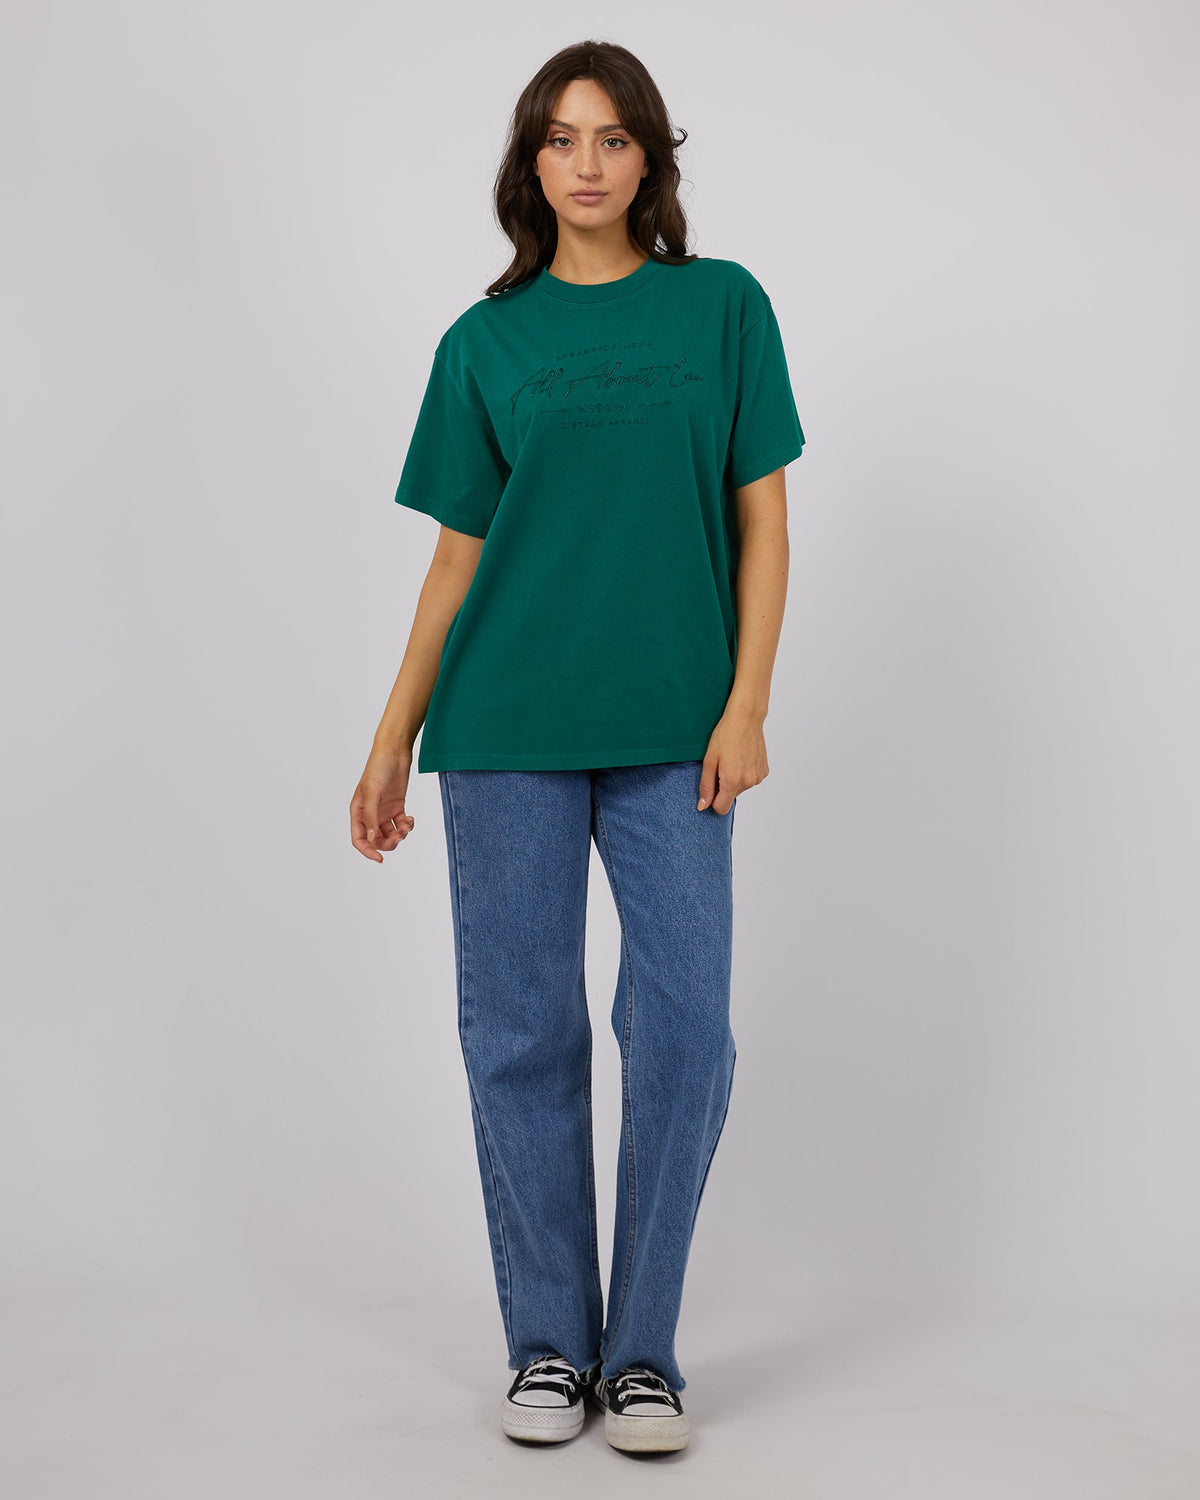 All About Eve-Classic Tee Emerald-Edge Clothing